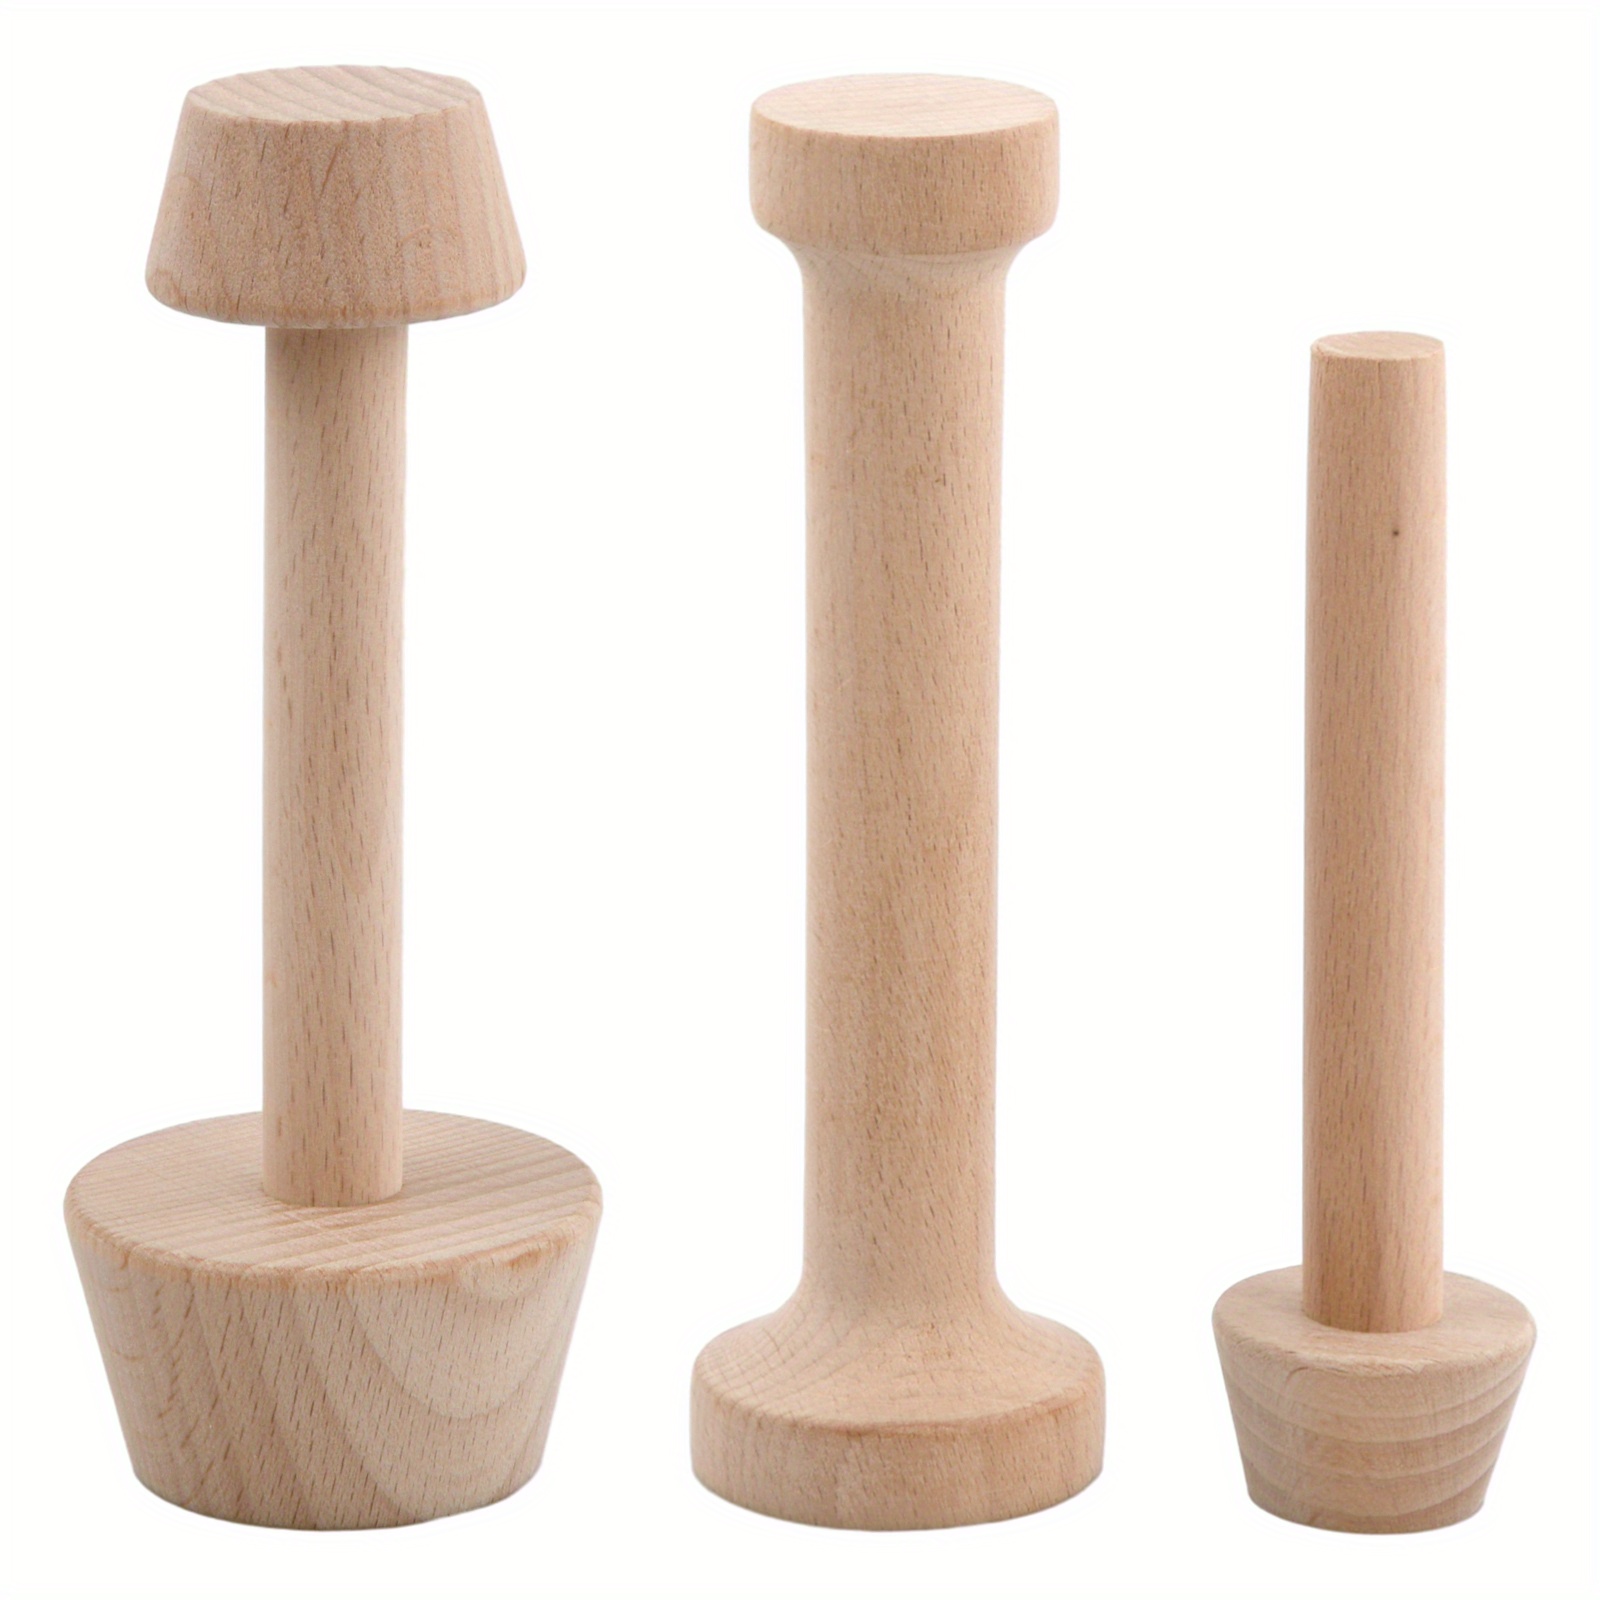 

3-piece Wooden Tart Tamper Set - Double-sided Pastry & Cheesecake Press, Diy Baking Tools For Tarts & Pies, Kitchen Essentials